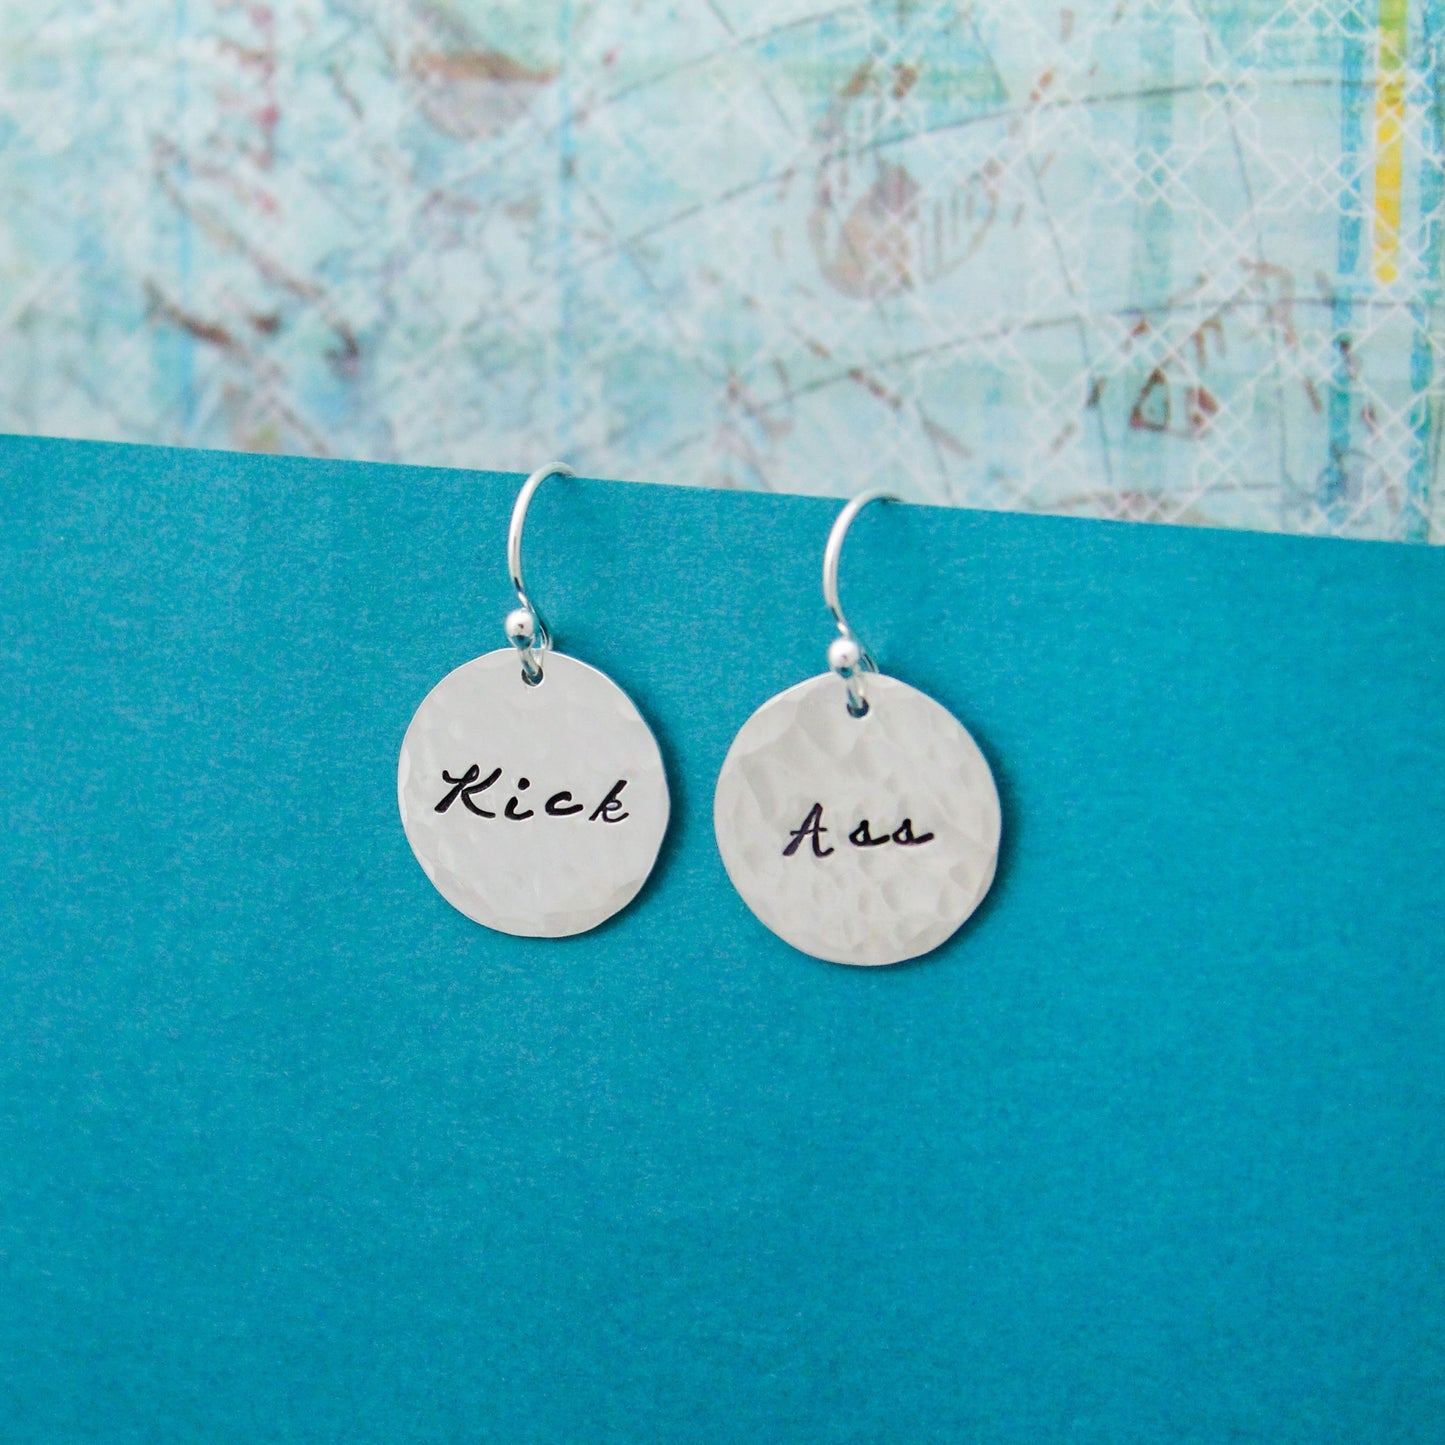 Kick Ass Earrings in Sterling Silver, Motivational Inspirational Jewelry, Gift for Her, Curse Word Jewelry, Kick Ass Gift, Punk Rock Jewelry